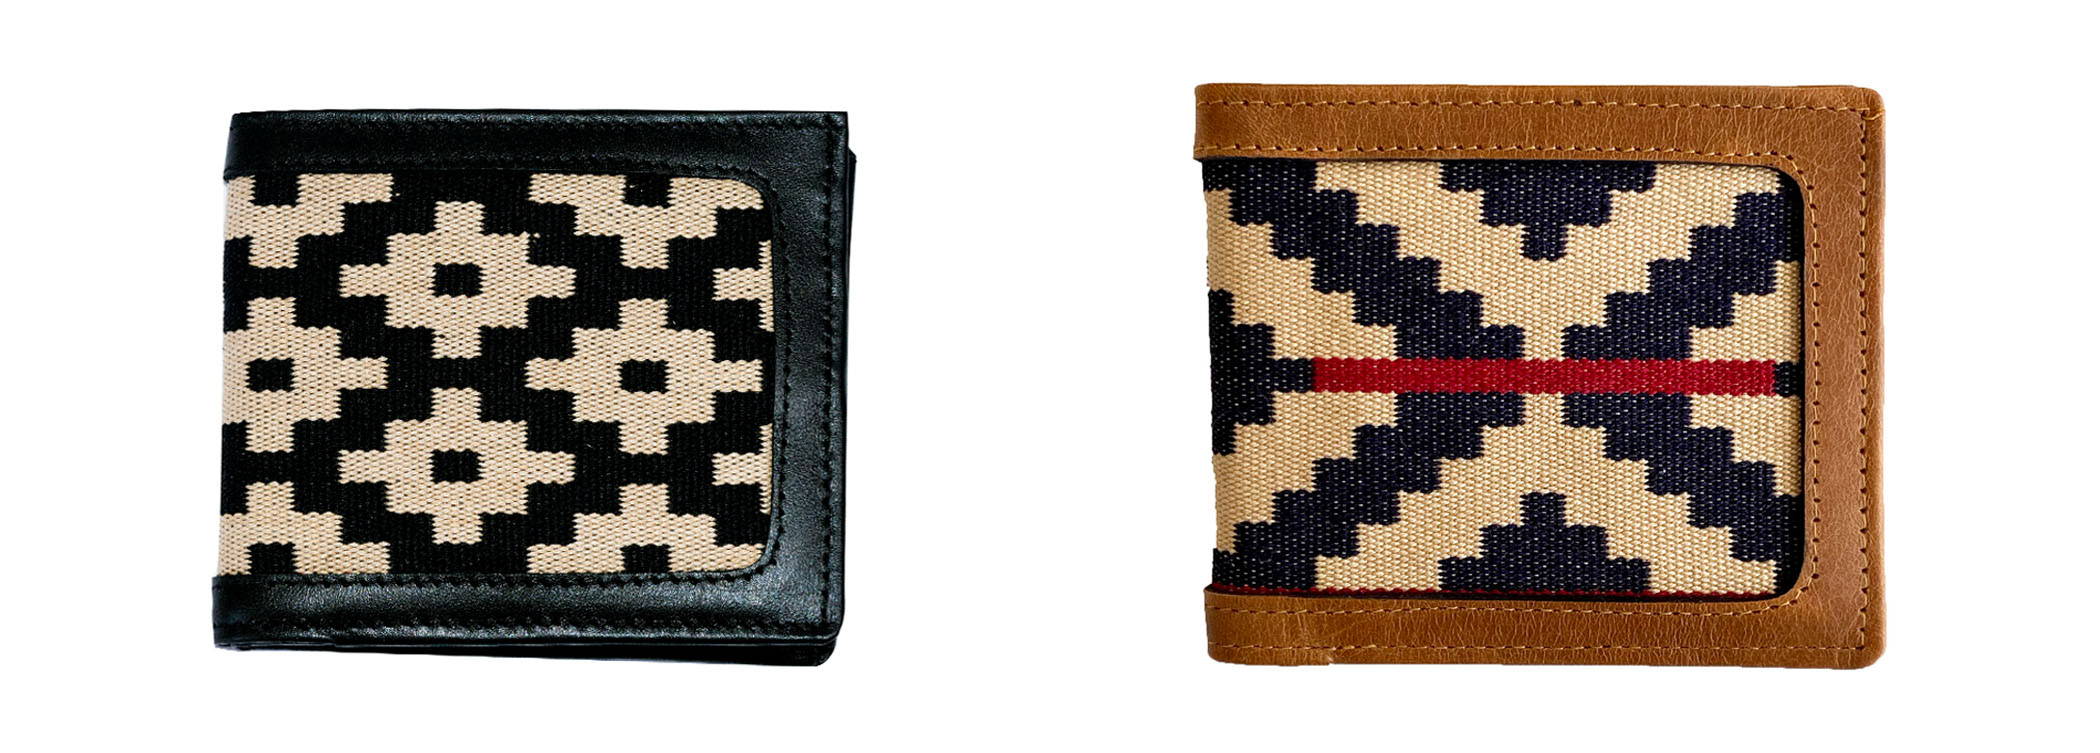 Gaucho-inspired Leather & Woven Wallet from cotton weave & vegetable-tanned leather